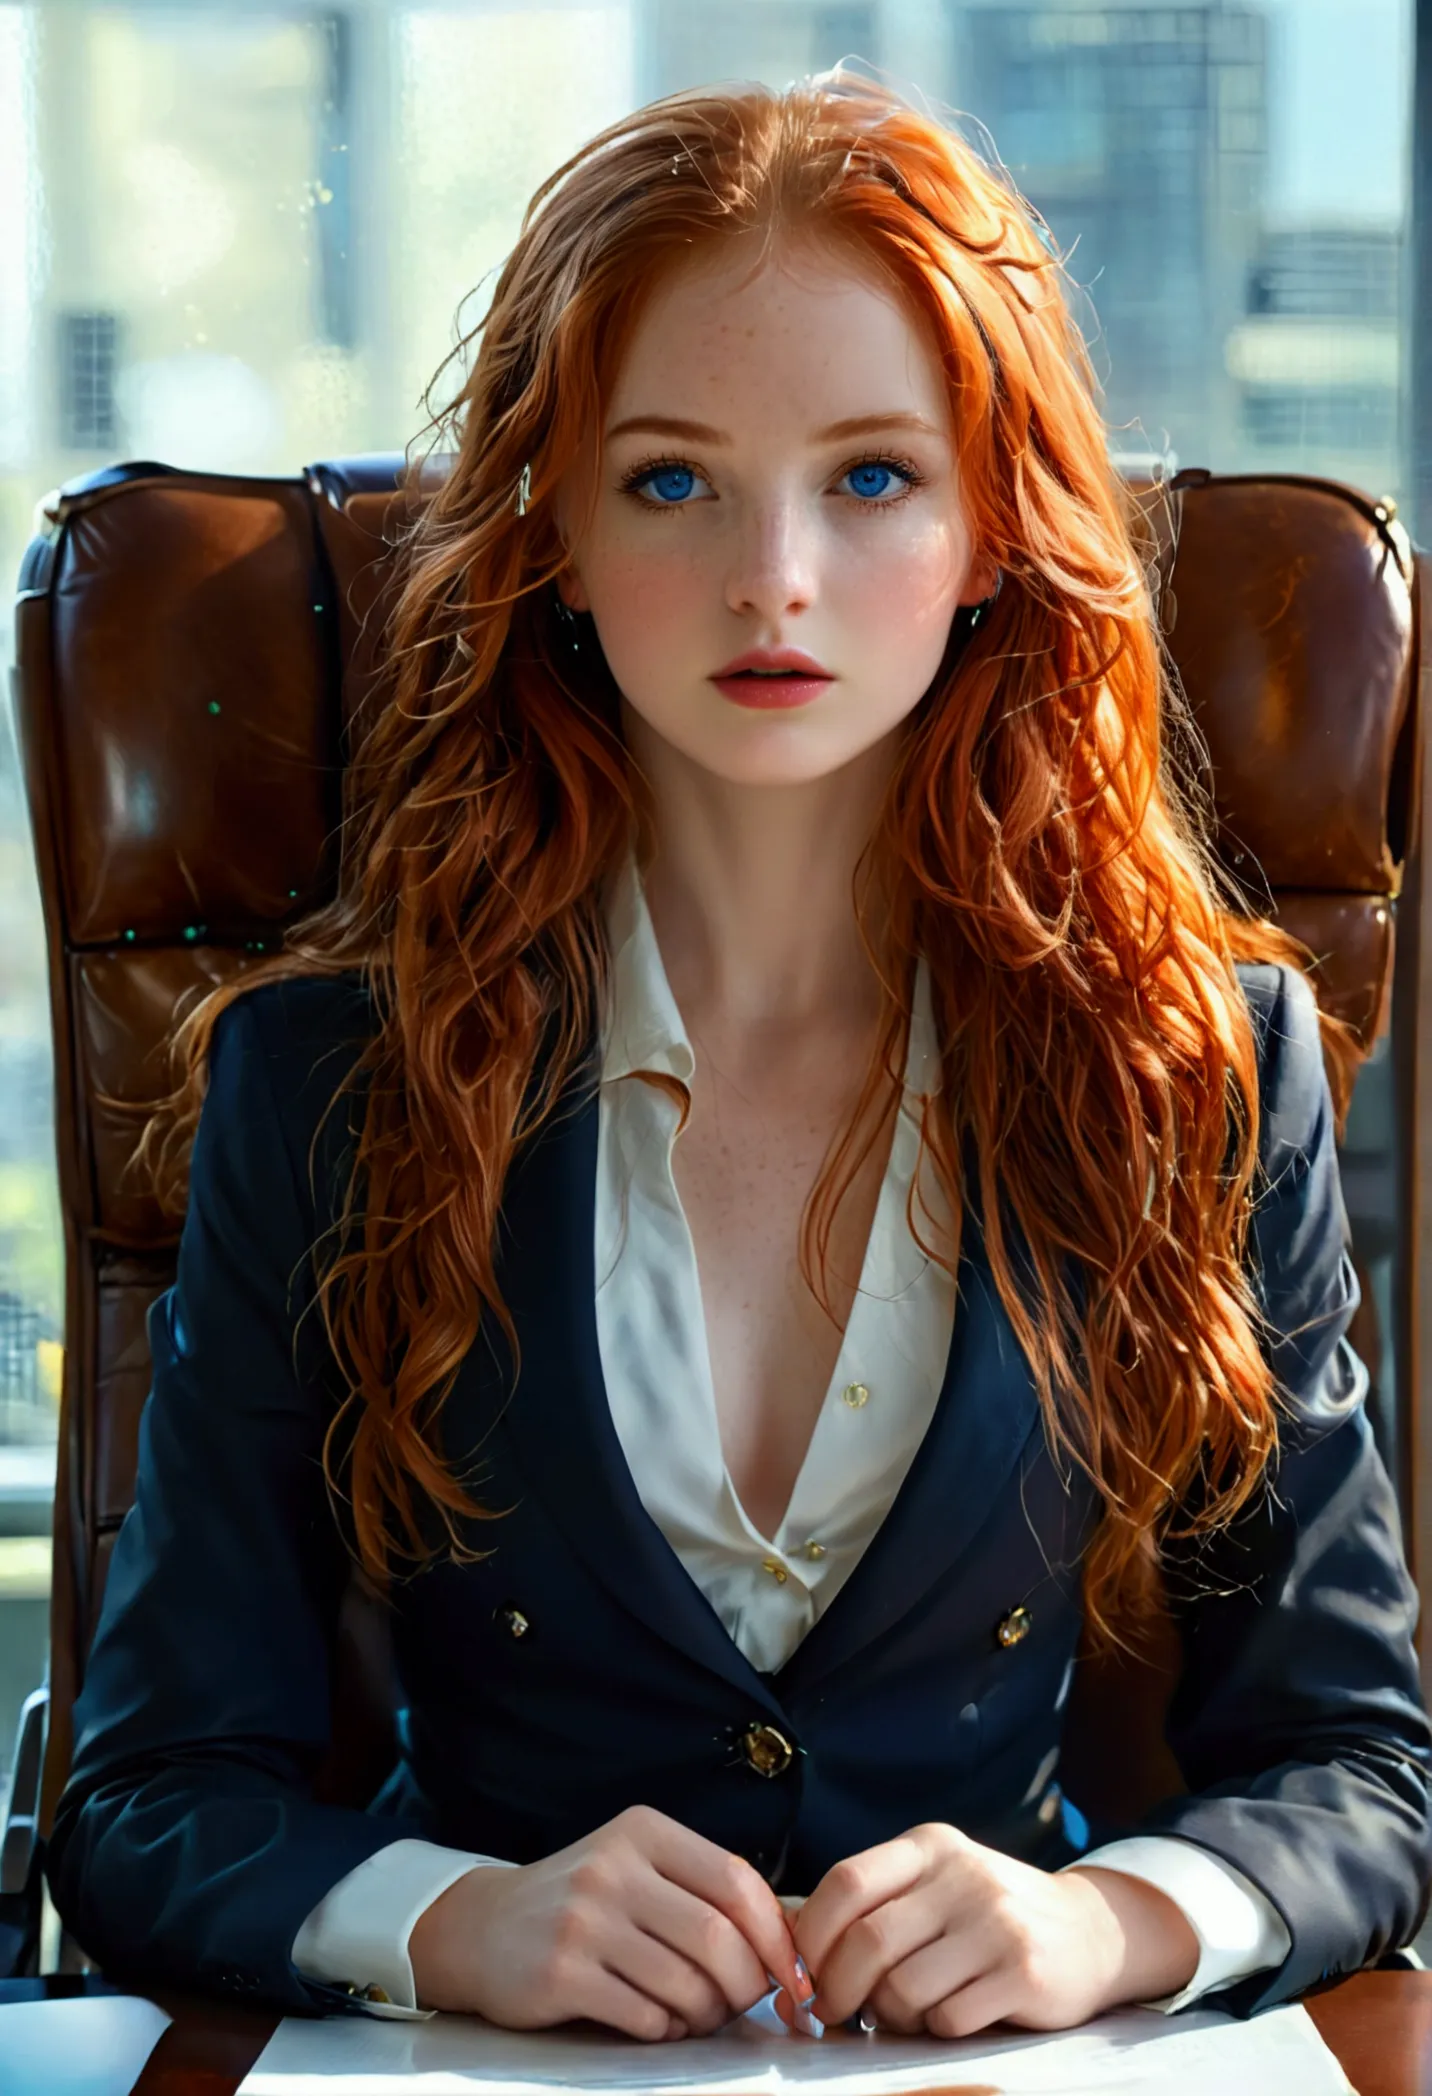 ultra realistic, fot, long redhead hair, beautiful blue eyes like the sky, pale white skin adorned with freckles, 24 year old gi...